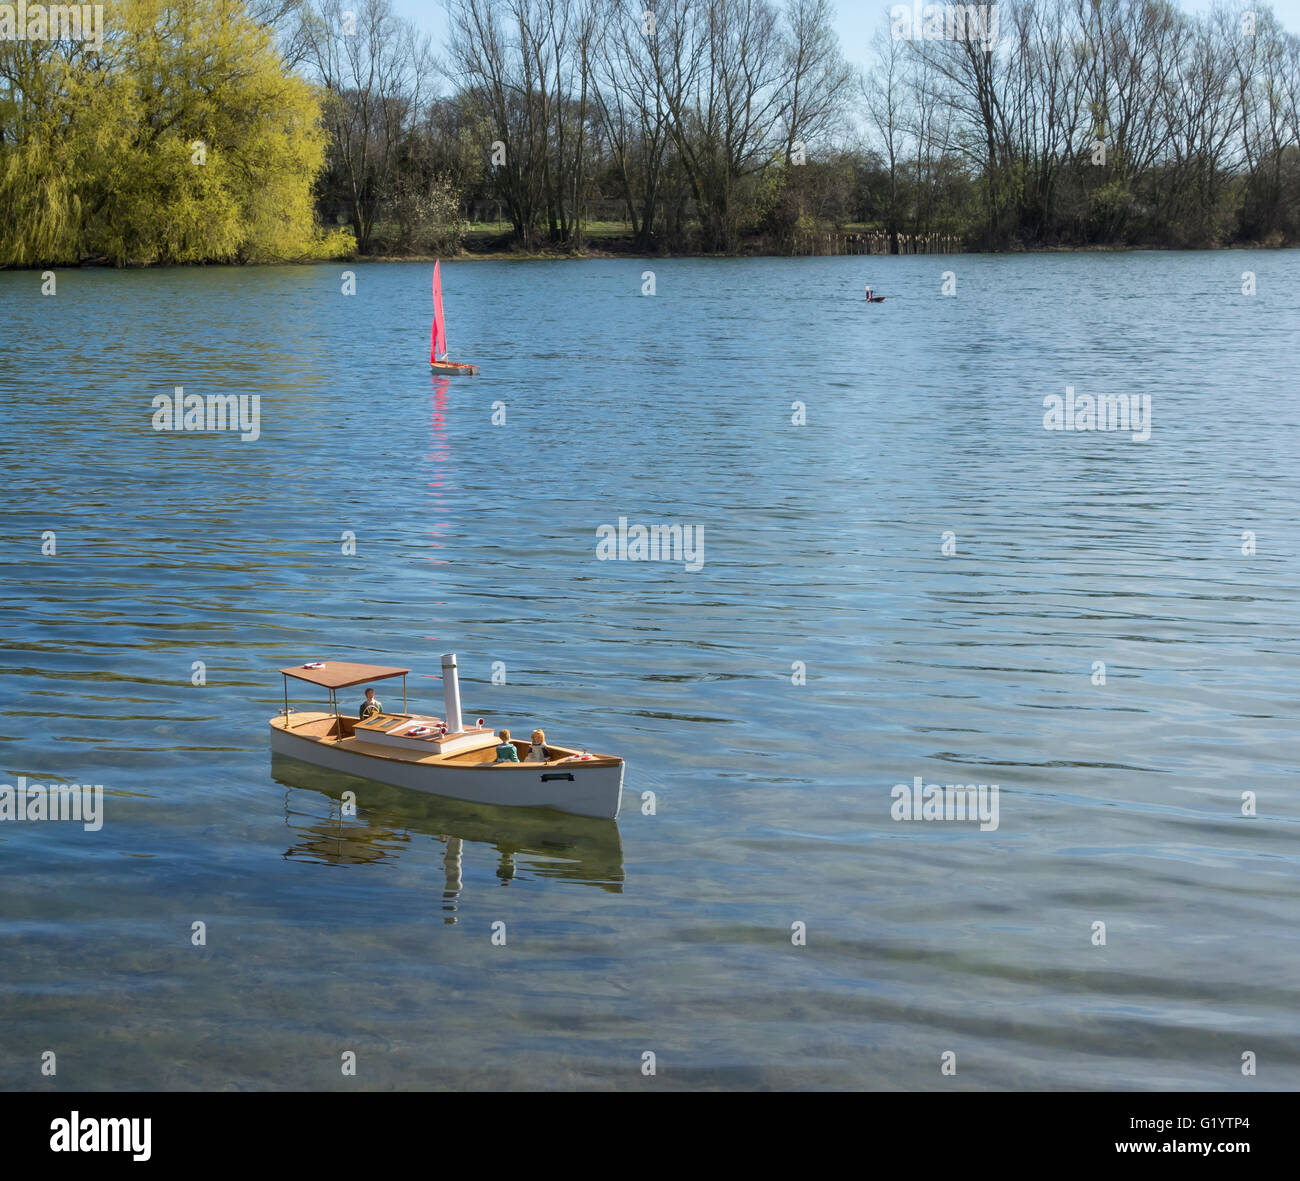 Model of a Victorian lake steam launch 'Milton Maid' Powered by electric motor sailing on Cawcutts lake Cambridge England Stock Photo